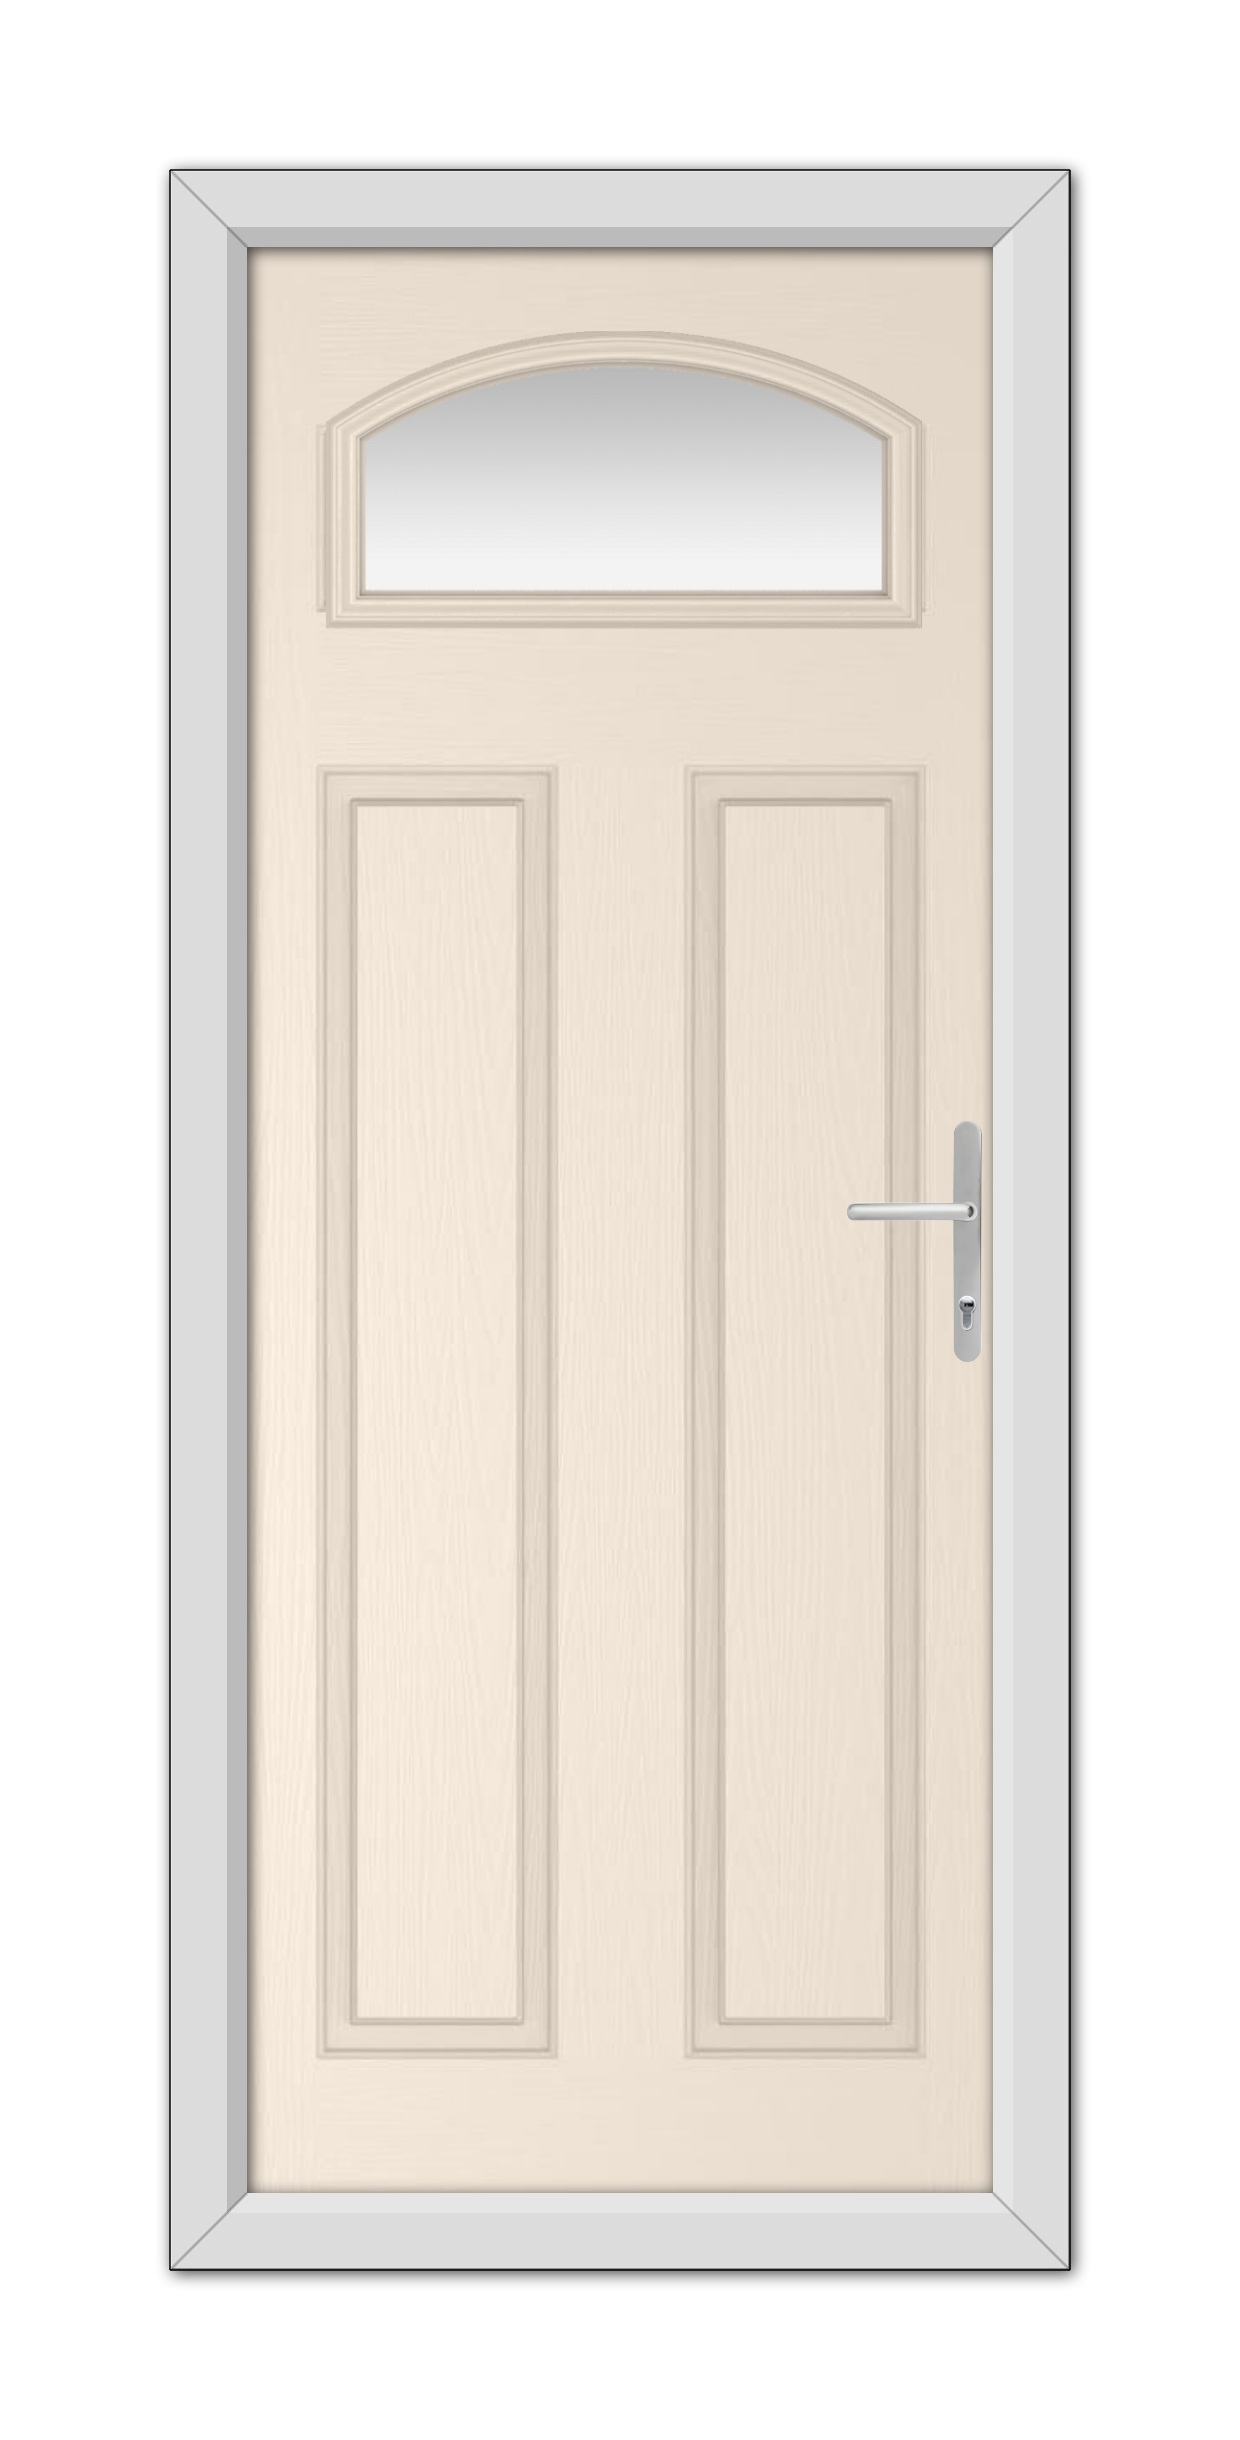 A realistic illustration of a Cream Harlington Composite Door 48mm Timber Core with a wooden texture and an arched window, set within a grey frame, equipped with a metallic handle on the right.